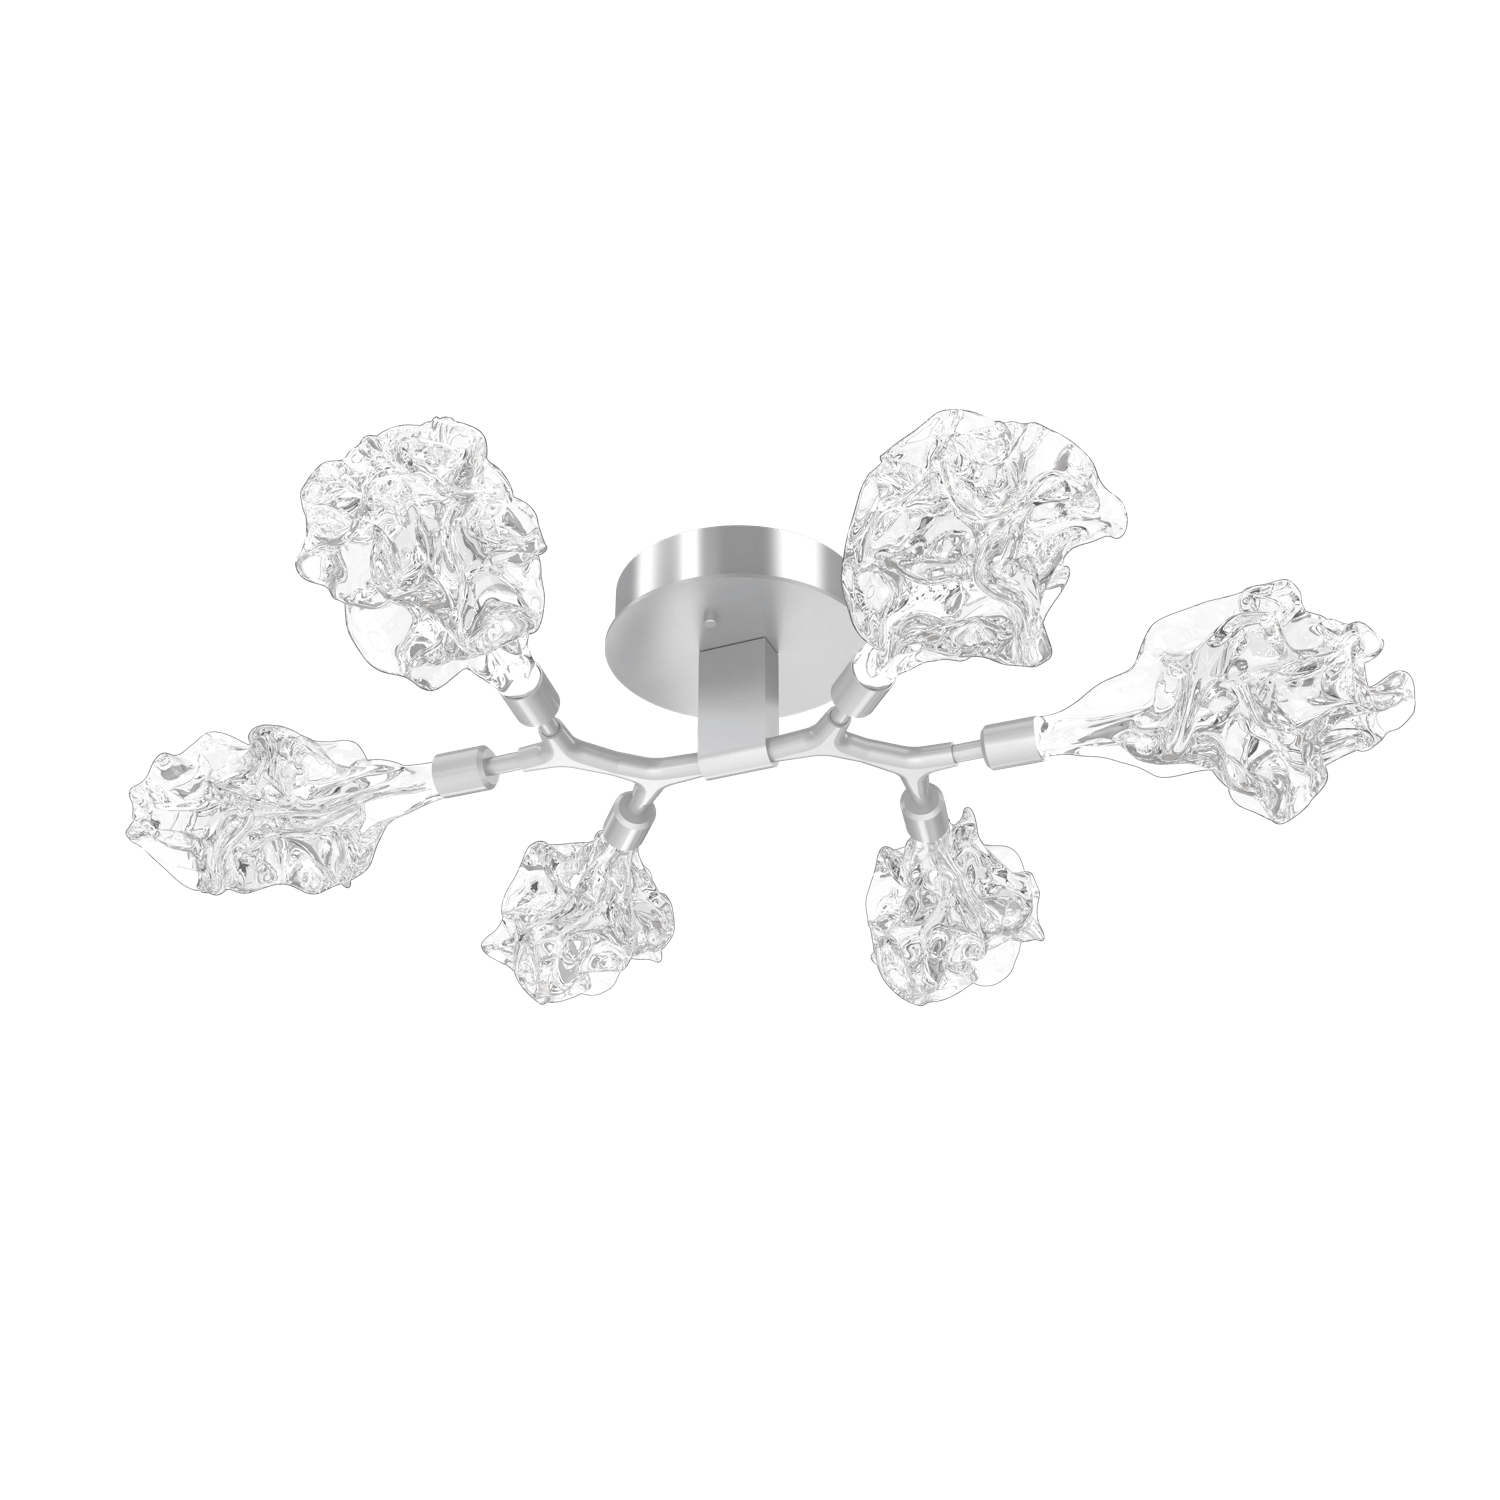 CLB0059-01-CS-Hammerton-Studio-Blossom-6-light-organic-flush-mount-light-with-classic-silver-finish-and-clear-handblown-crystal-glass-shades-and-LED-lamping